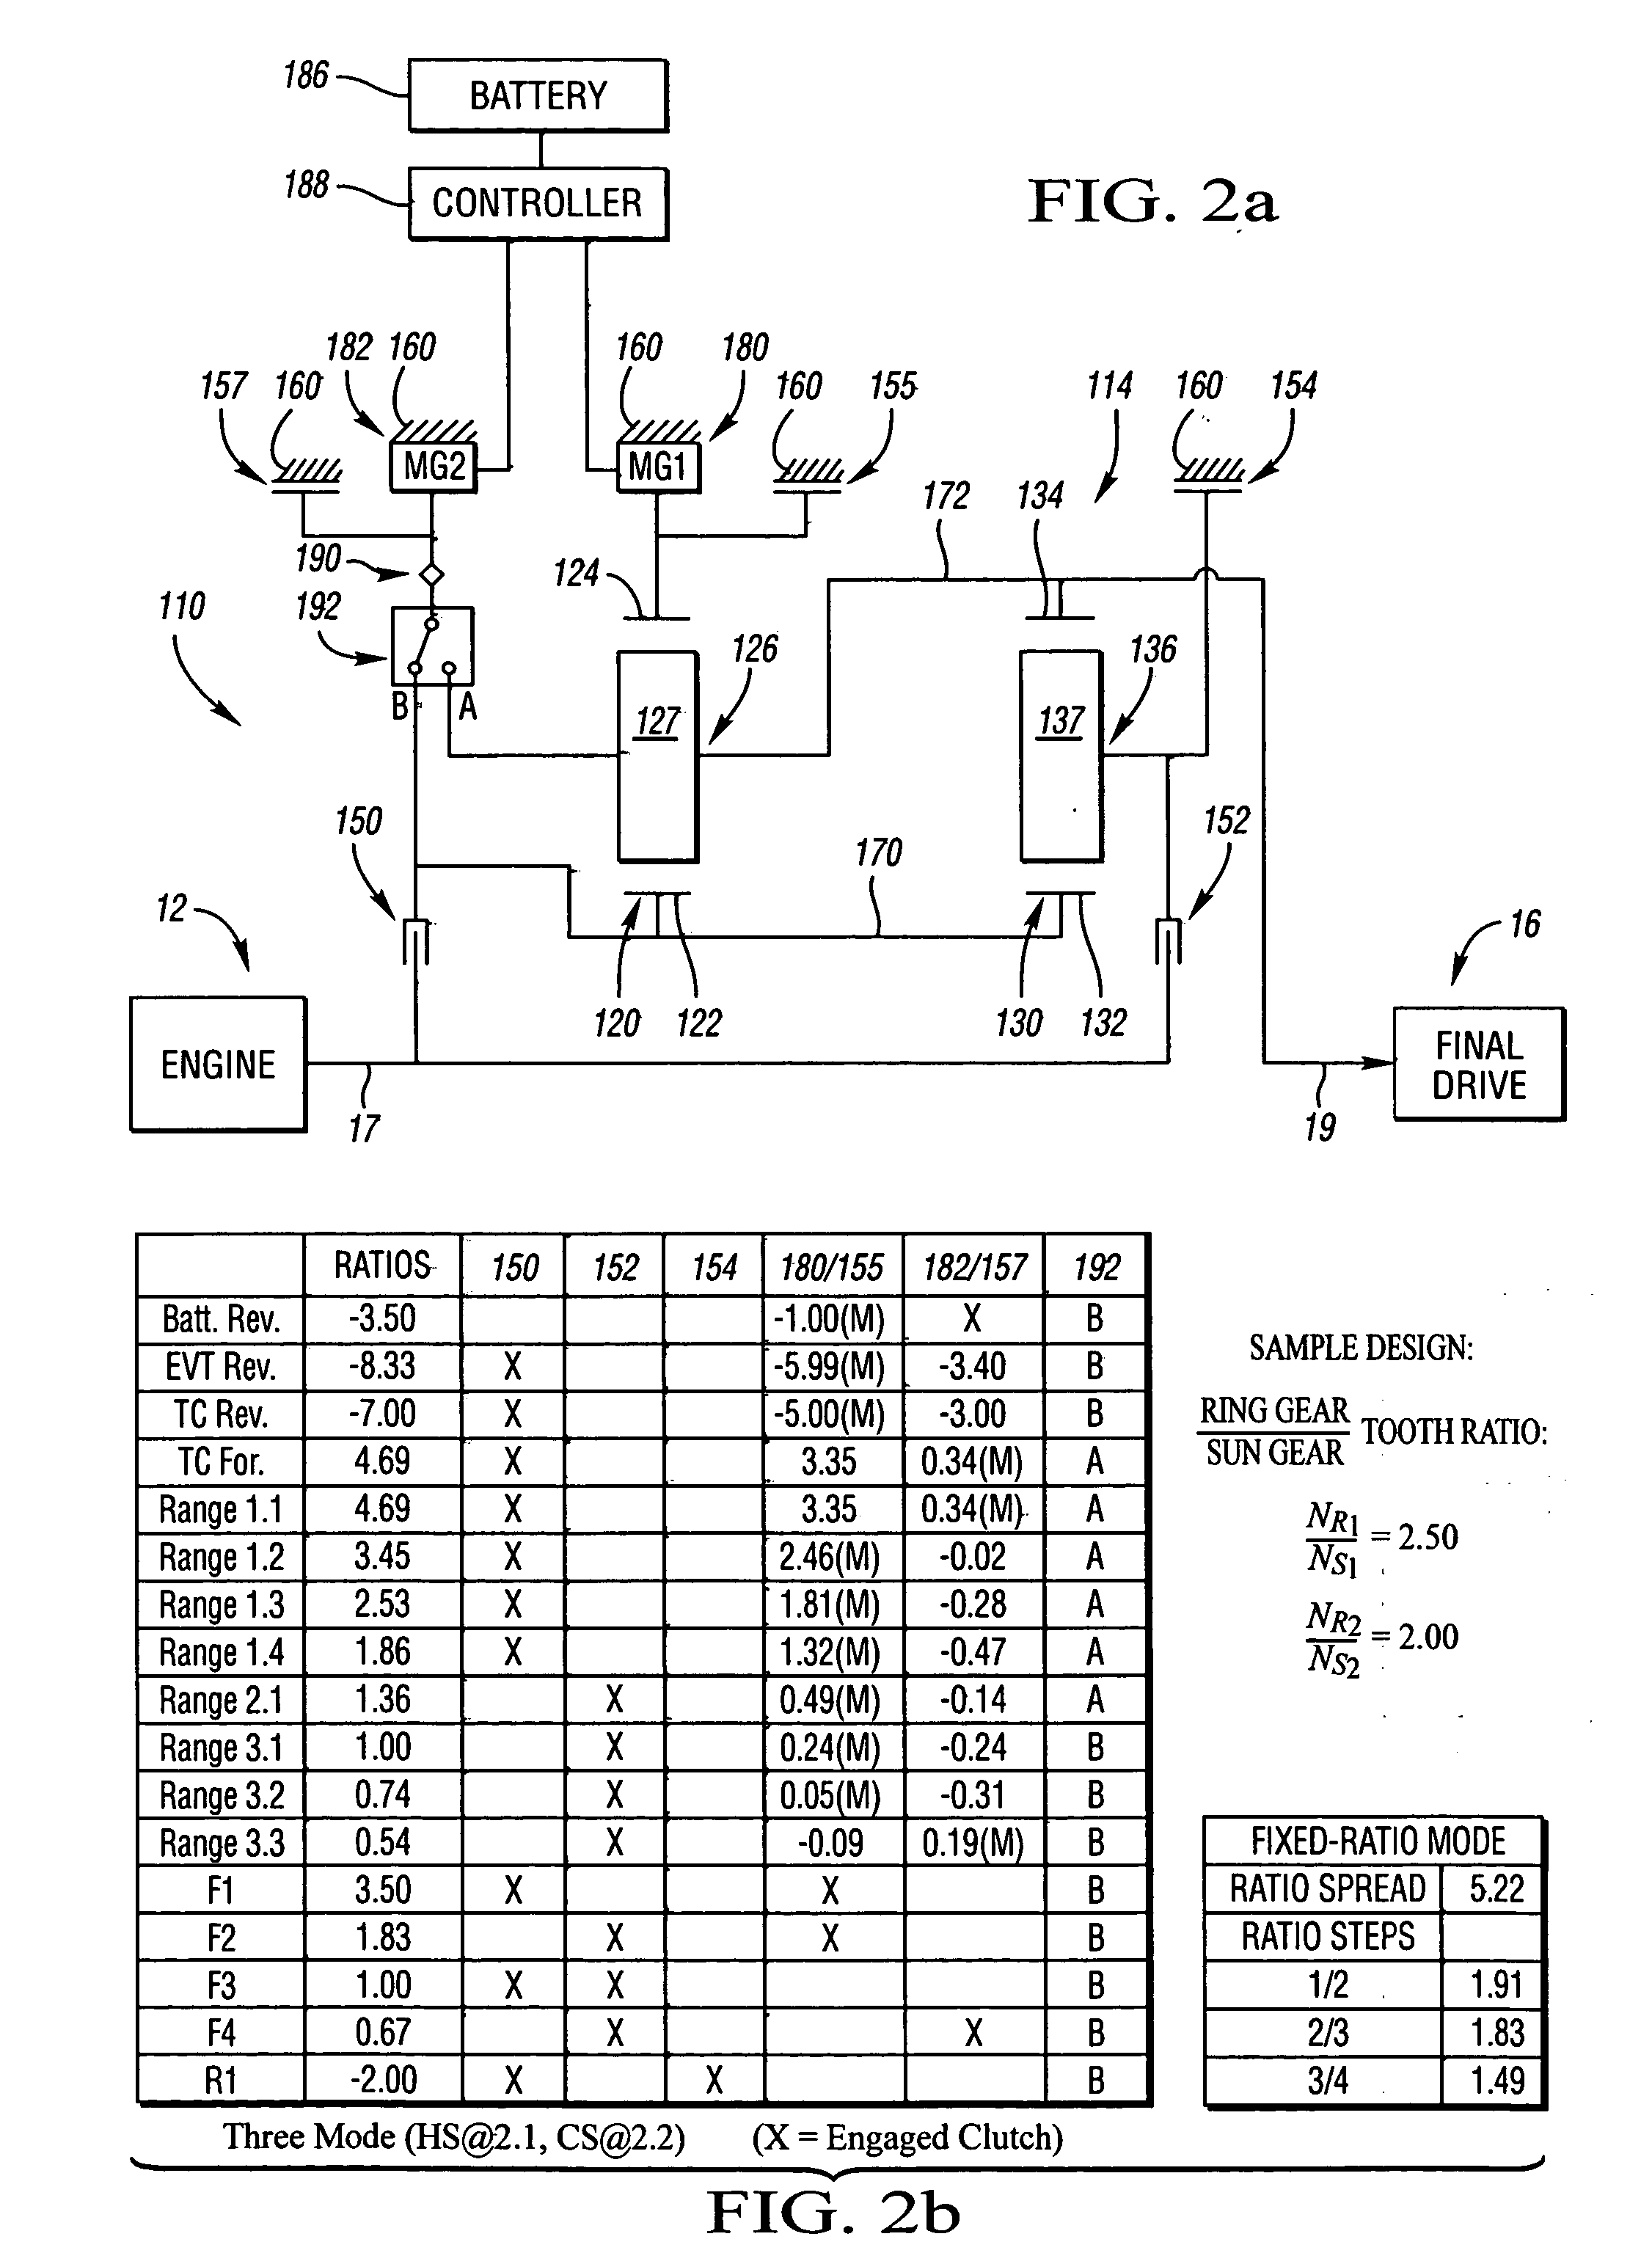 Multi-mode electrically variable transmissions having two planetary gear sets with two fixed interconnections and clutched input